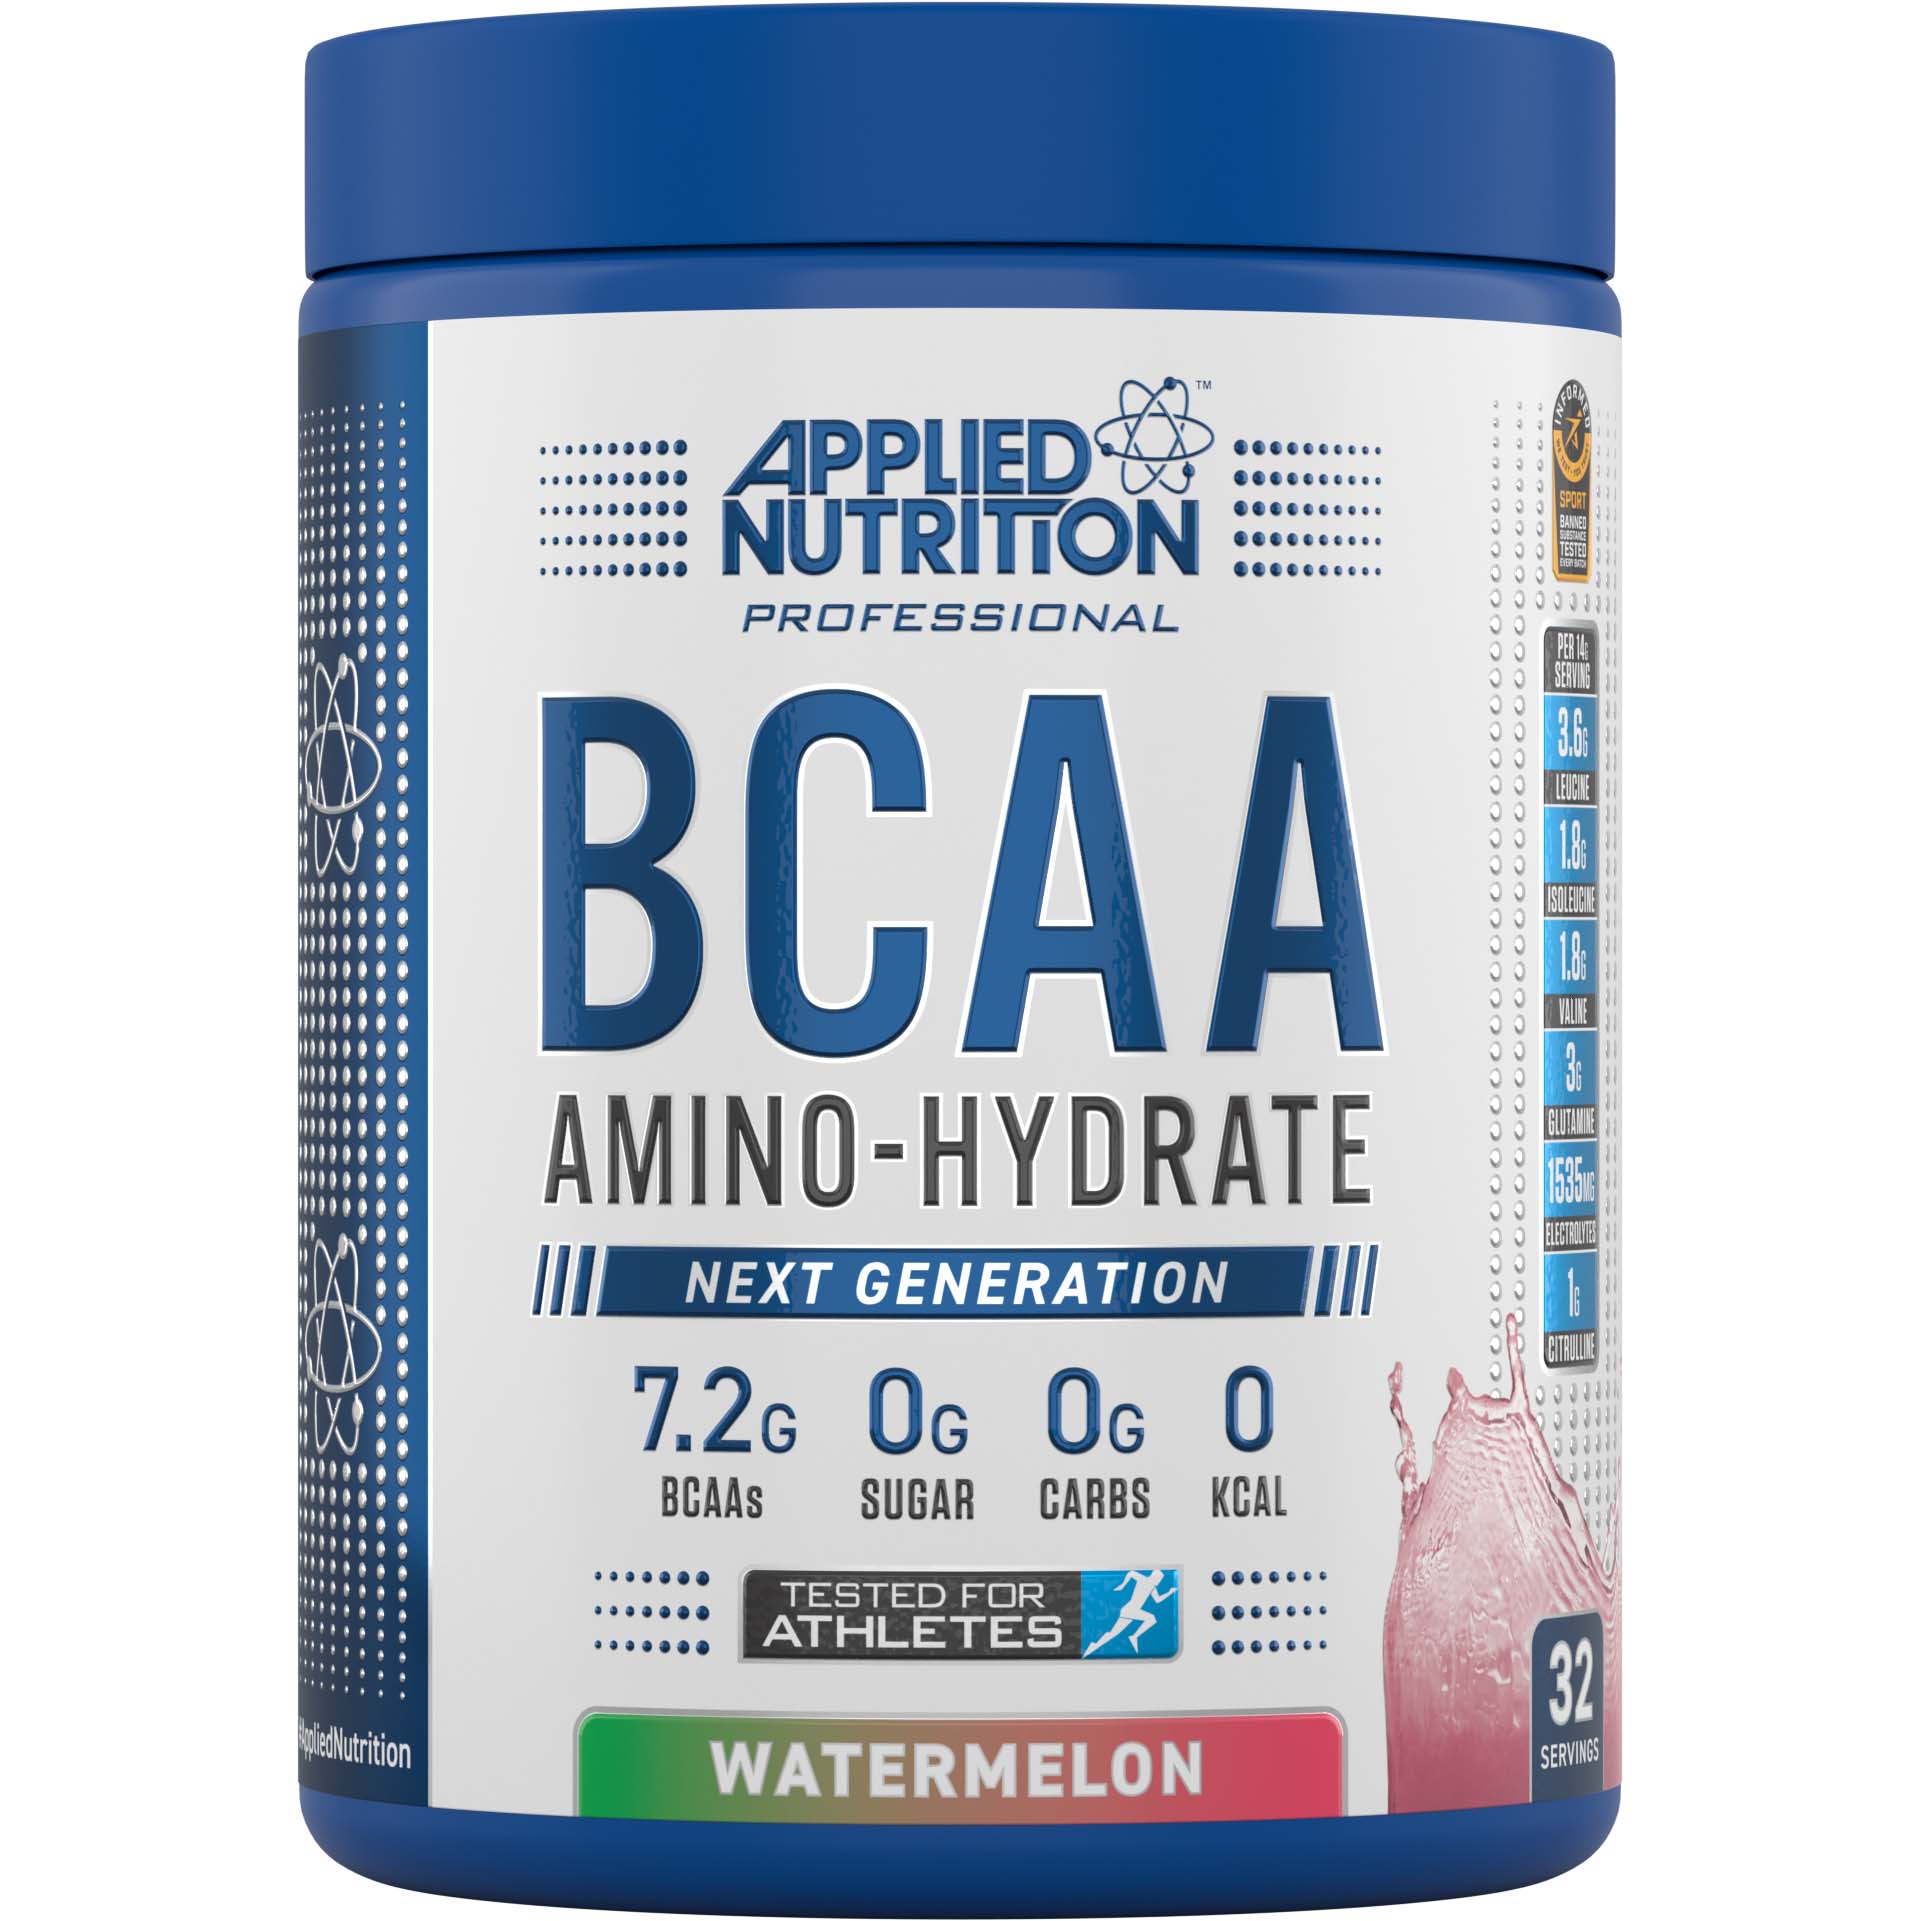 Applied Nutrition BCAA Amino Hydrate, Watermelon, 32 Serving